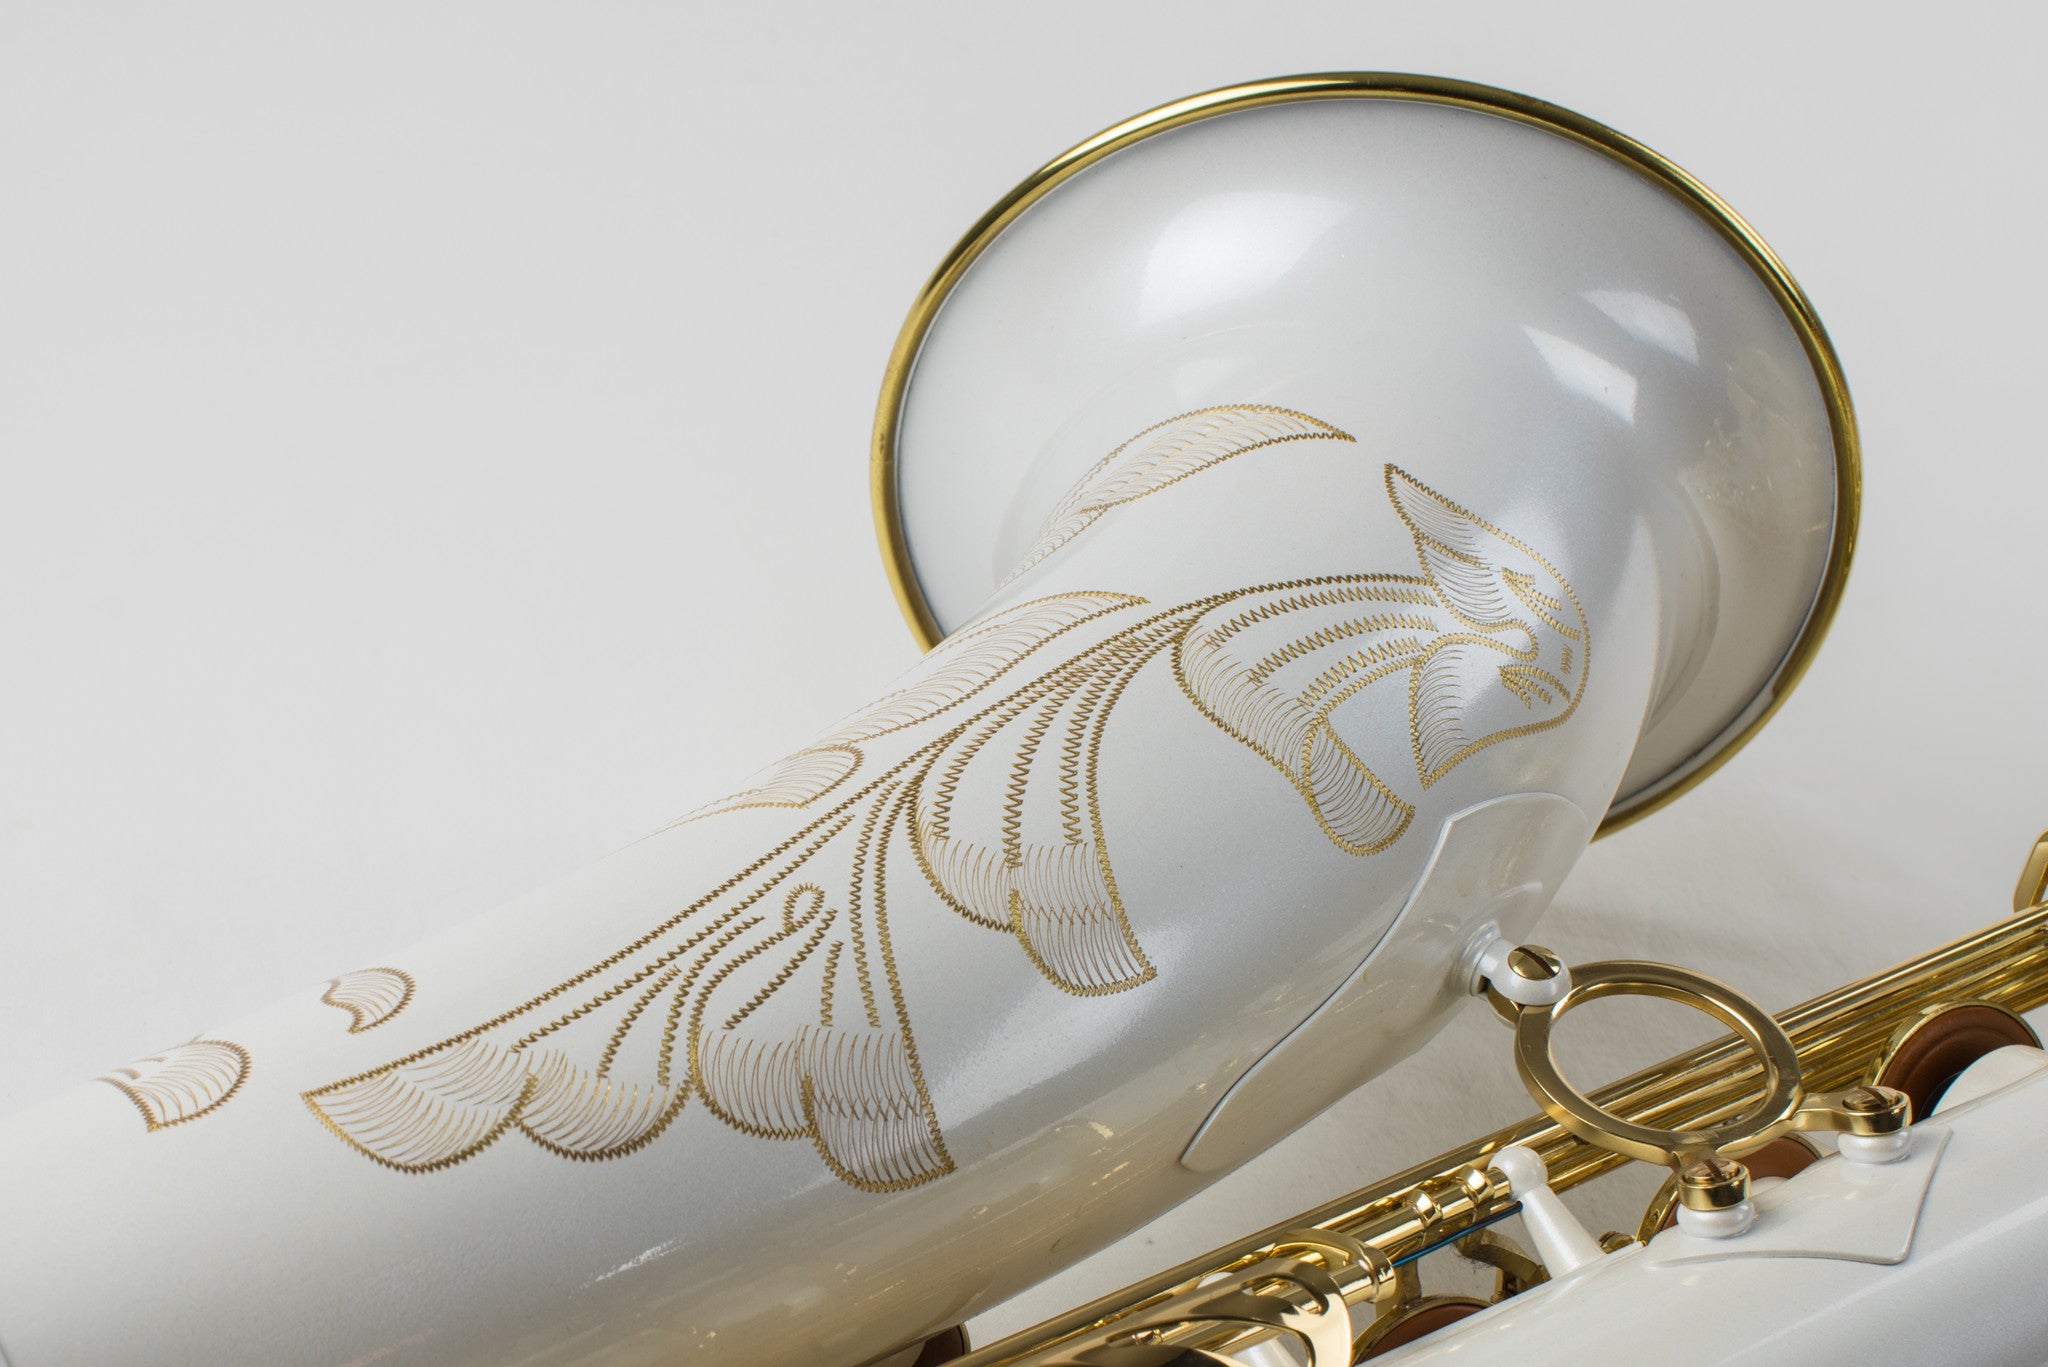 Selmer Super Action Series II Tenor Saxophone With Factory White Finish RARE!!!